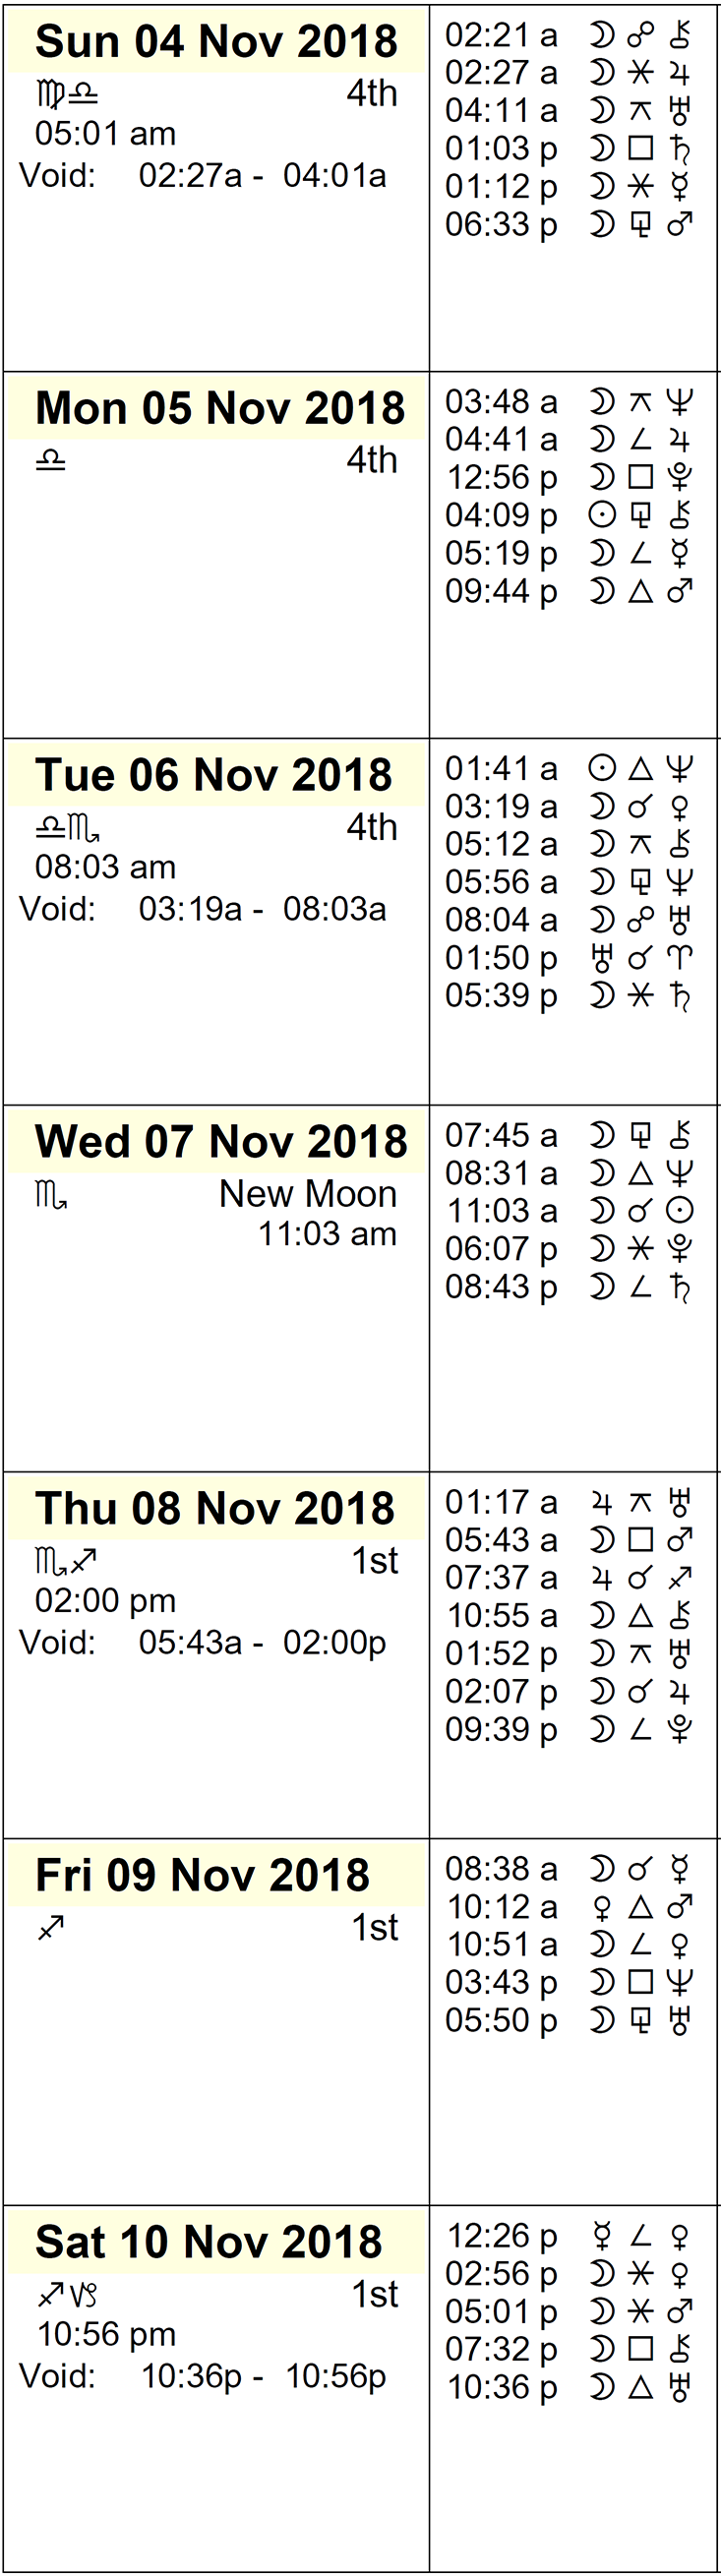 This Week in Astrology Calendar: November 4th to 10th, 2018